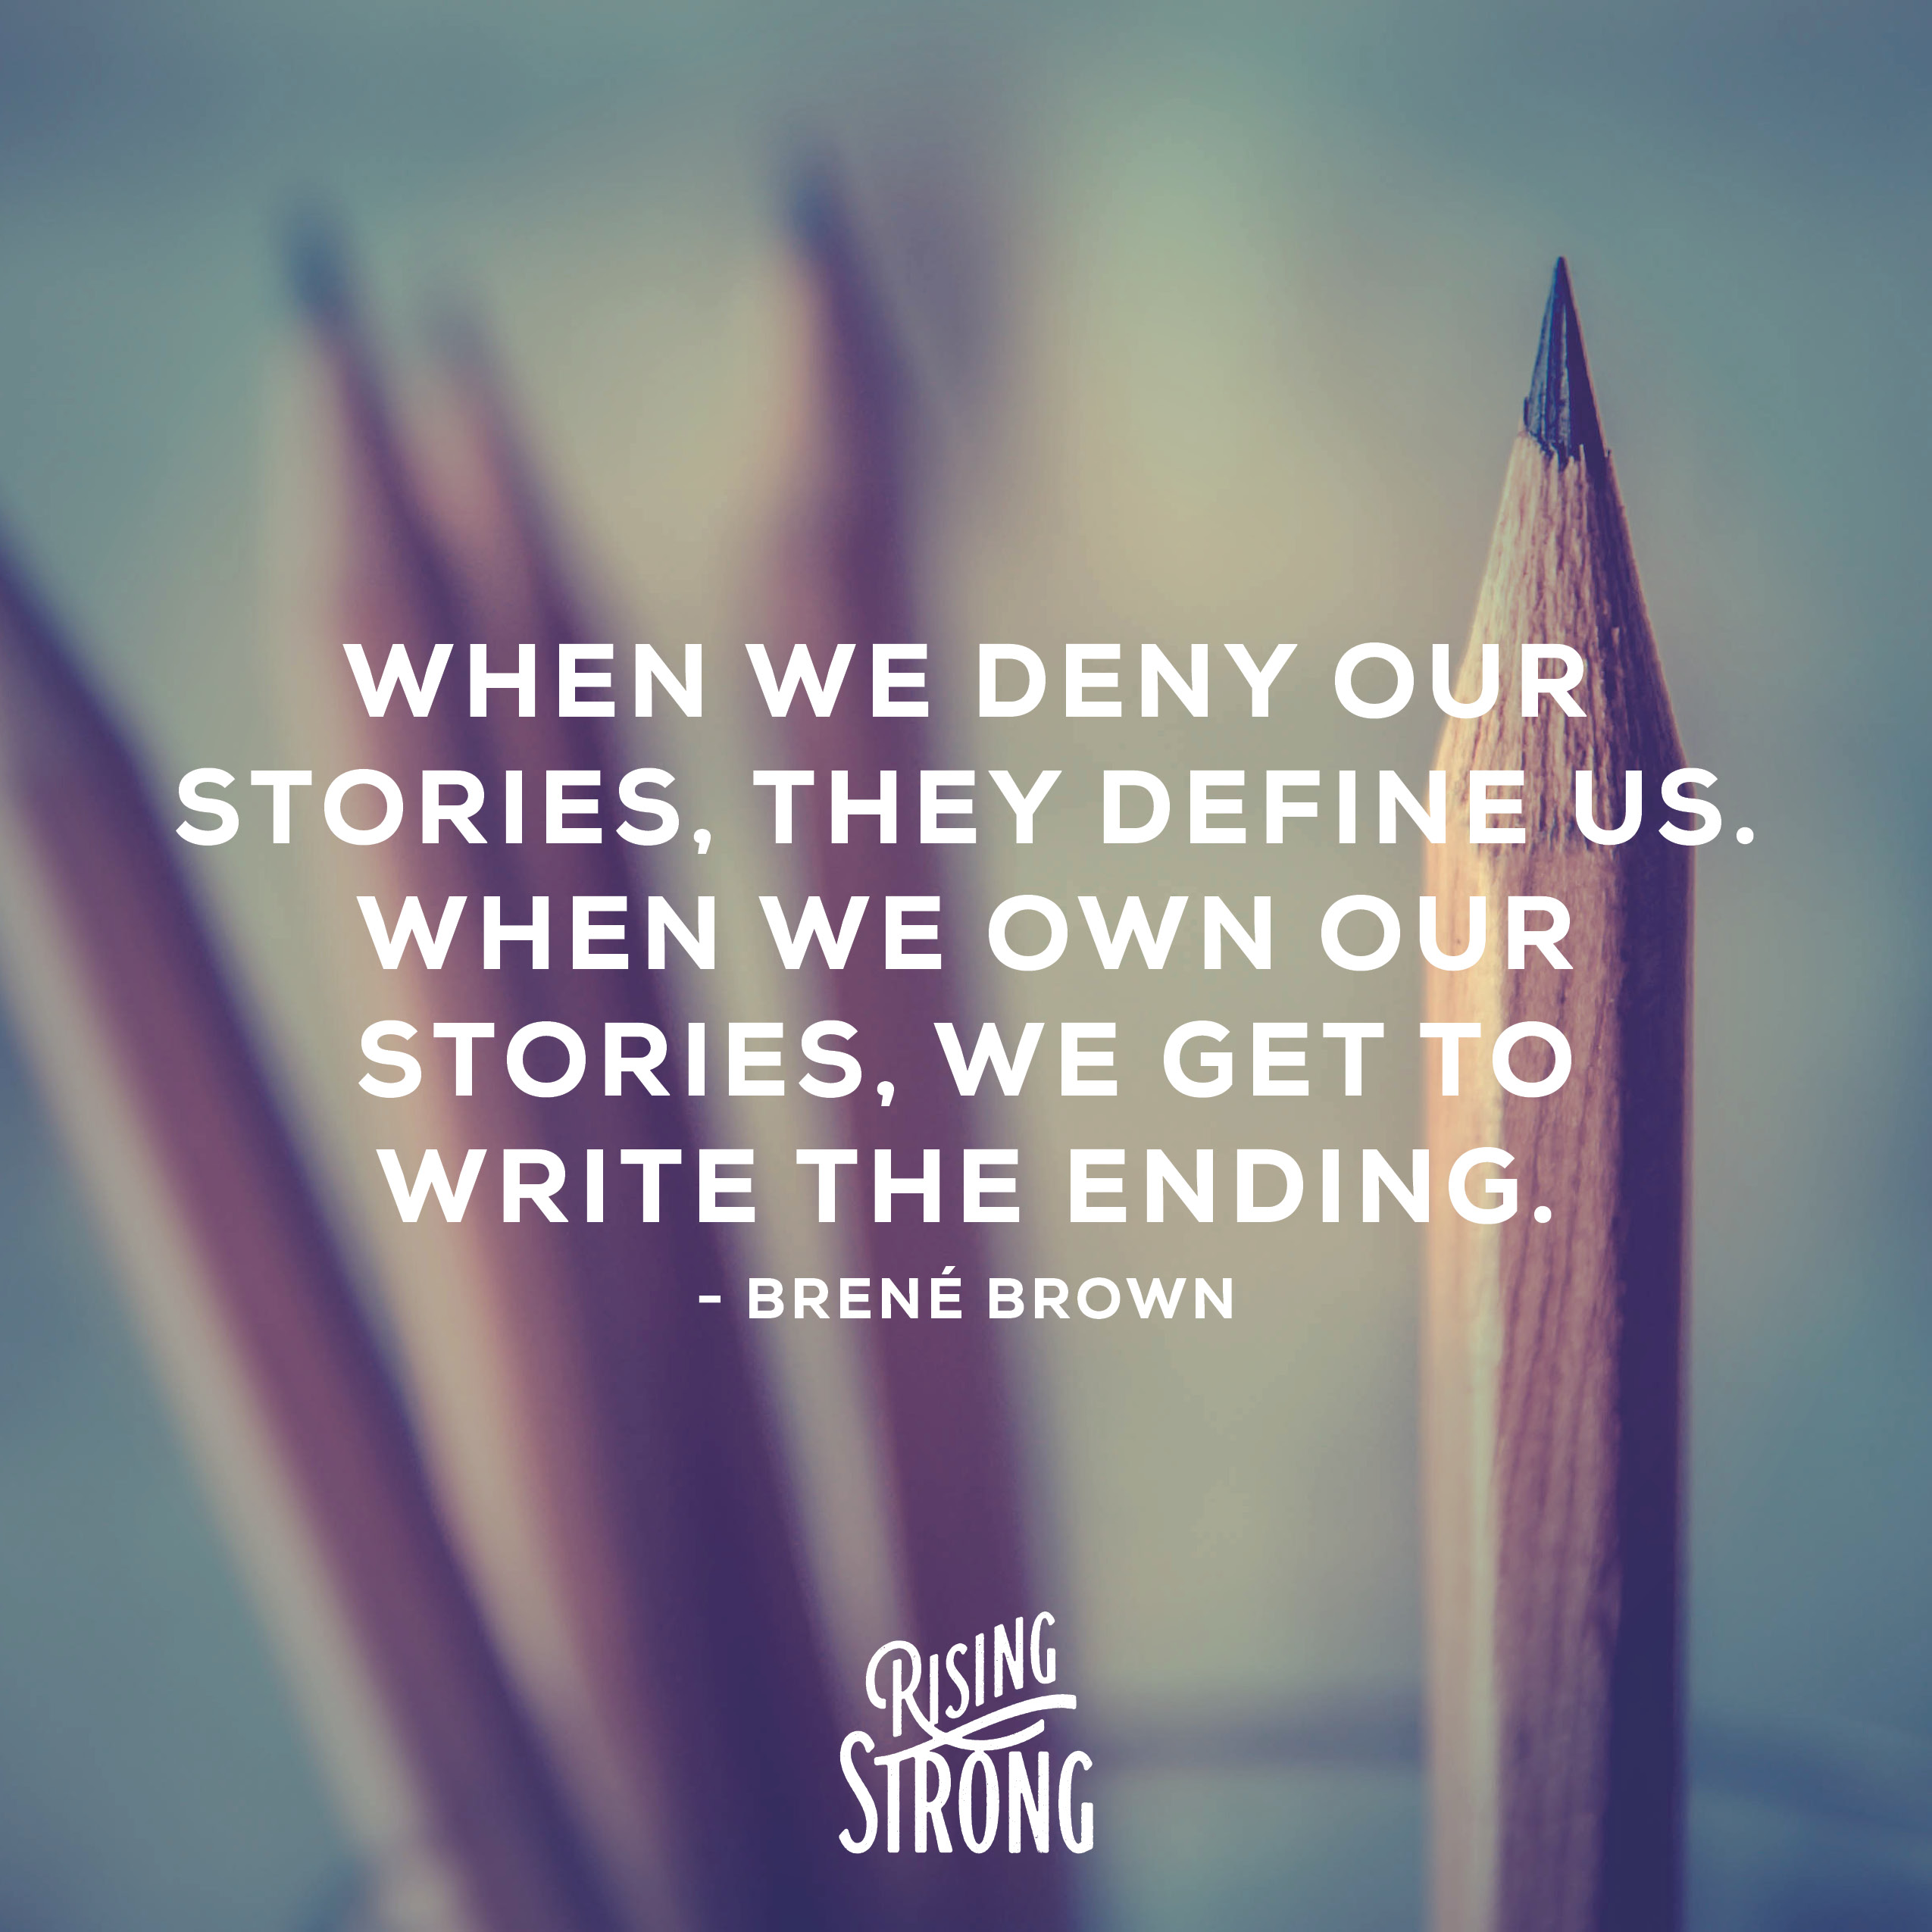 When we deny our stories, they define us. When we own our stories, we get to write the ending. ~Brené Brown